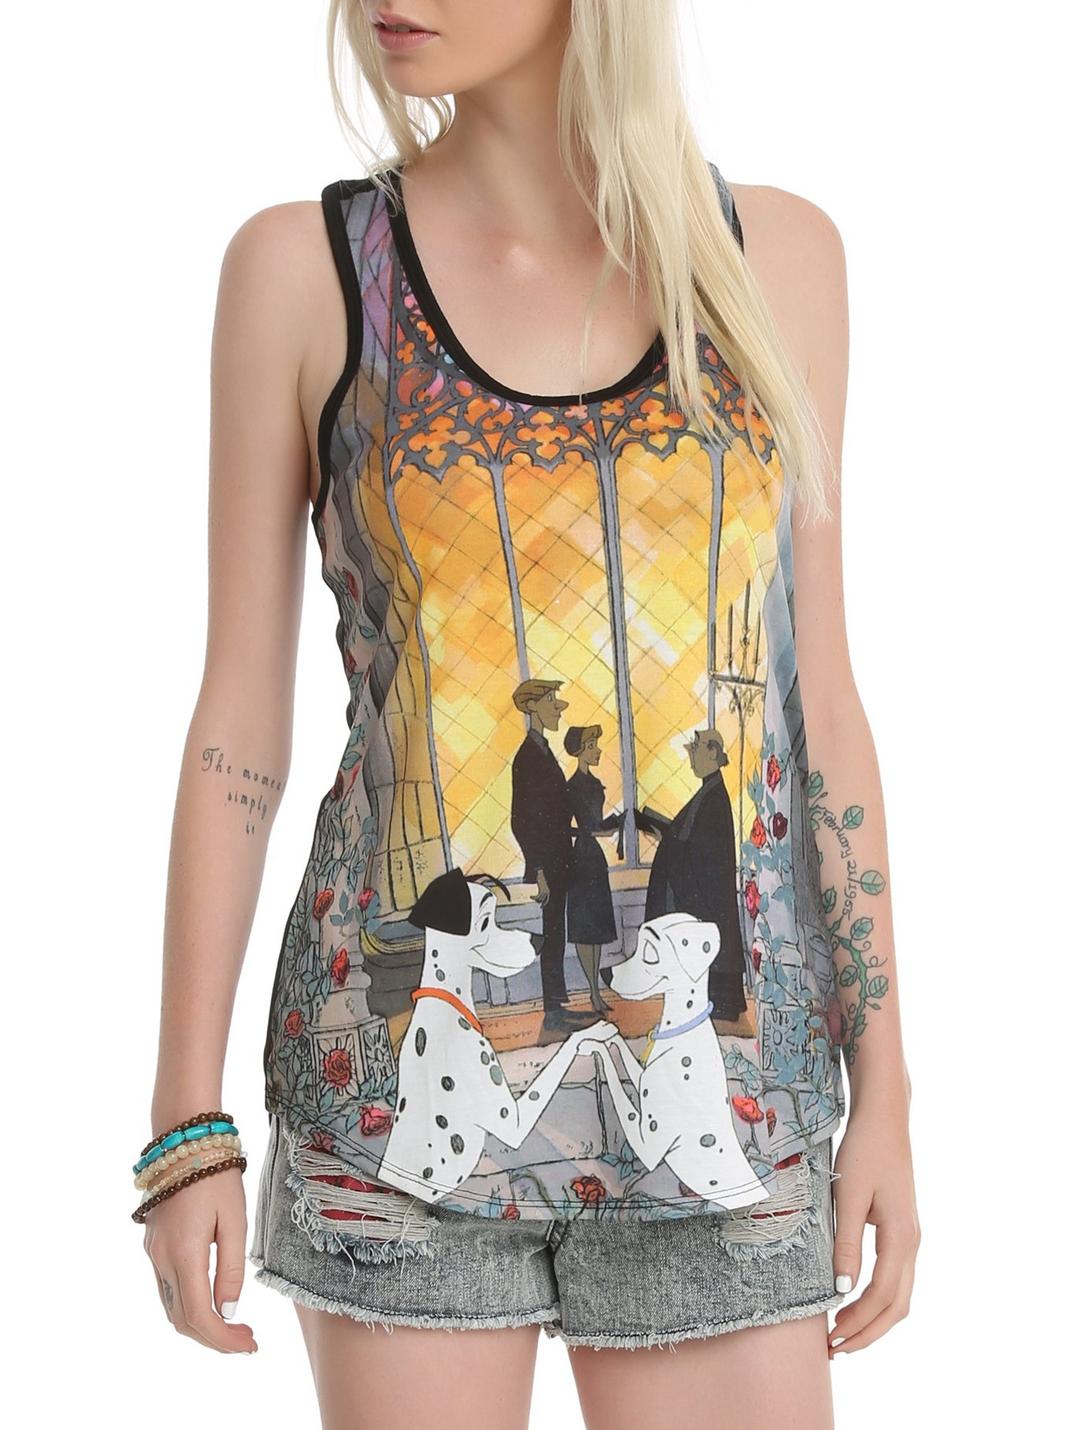 Disney One Hundred And One Dalmatians Forever Girls Tank Top, BLACK, hi-res